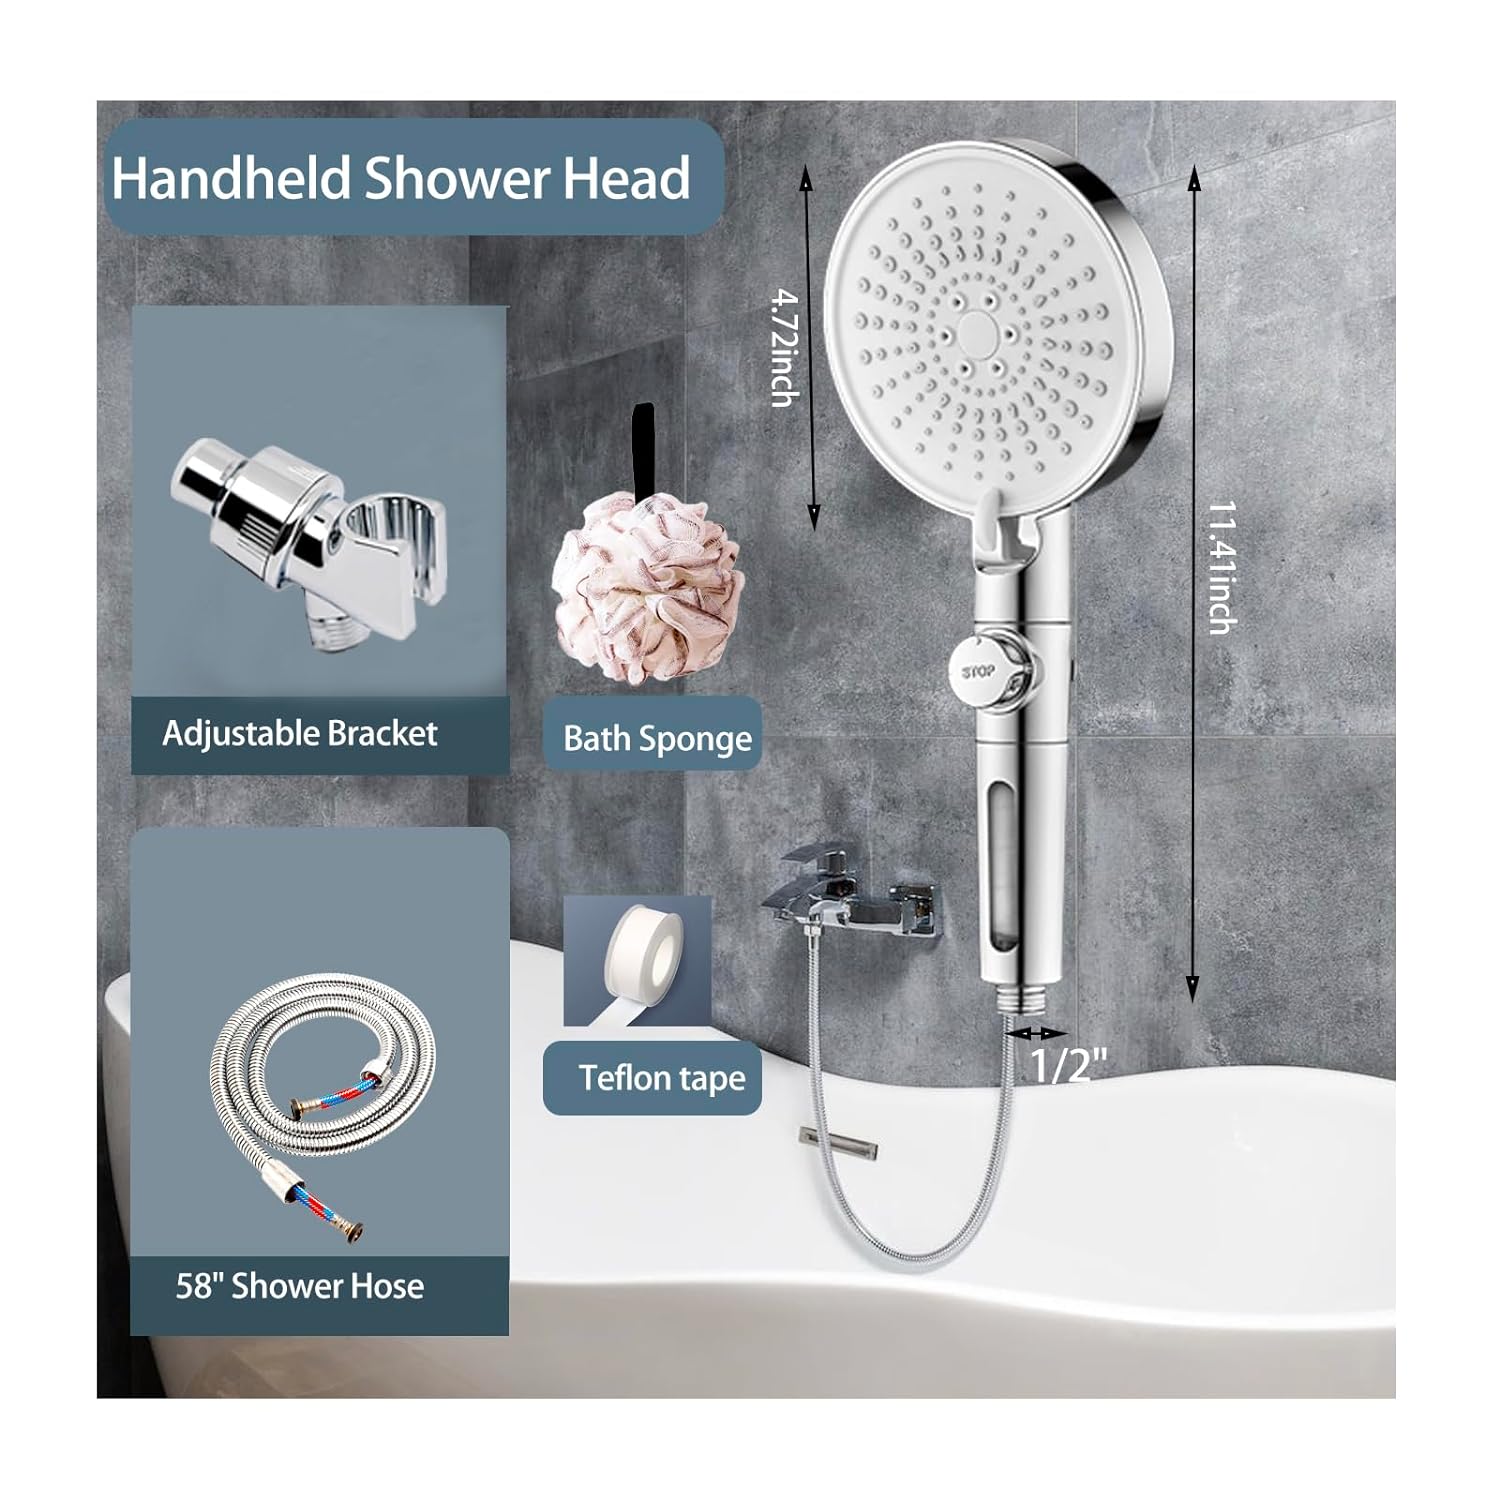 Large Panel Shower Head High Pressure Filtered ShowerHead 6 Setting,The built-in wash feature allows,with Hose & Holder Powerful Shower Heads and Bath Sponge for Bathroom Silver Color